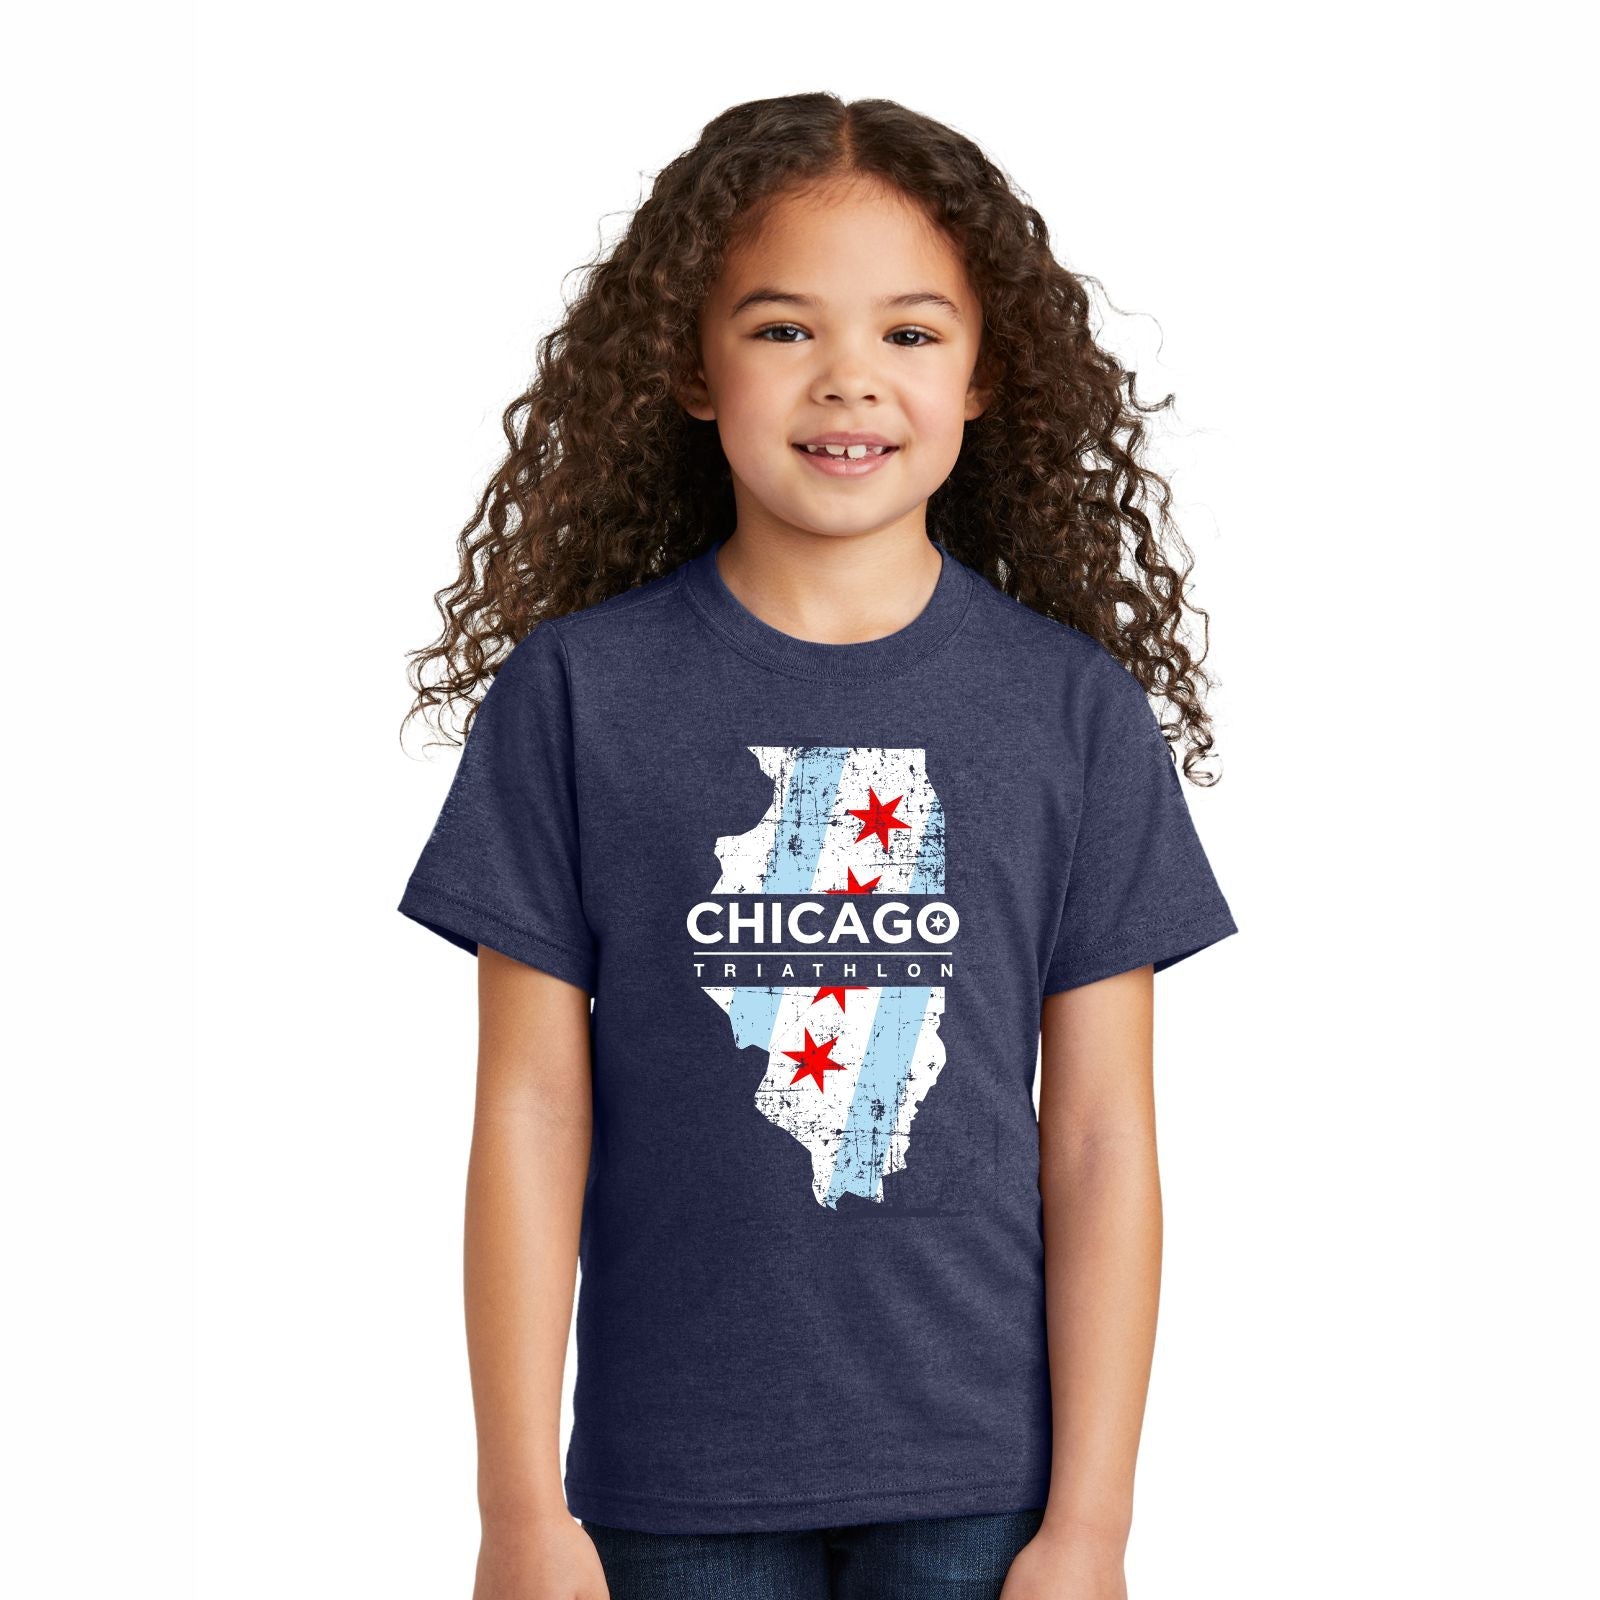 CHI TRI Youth Triblend Tee -Navy Heather- State